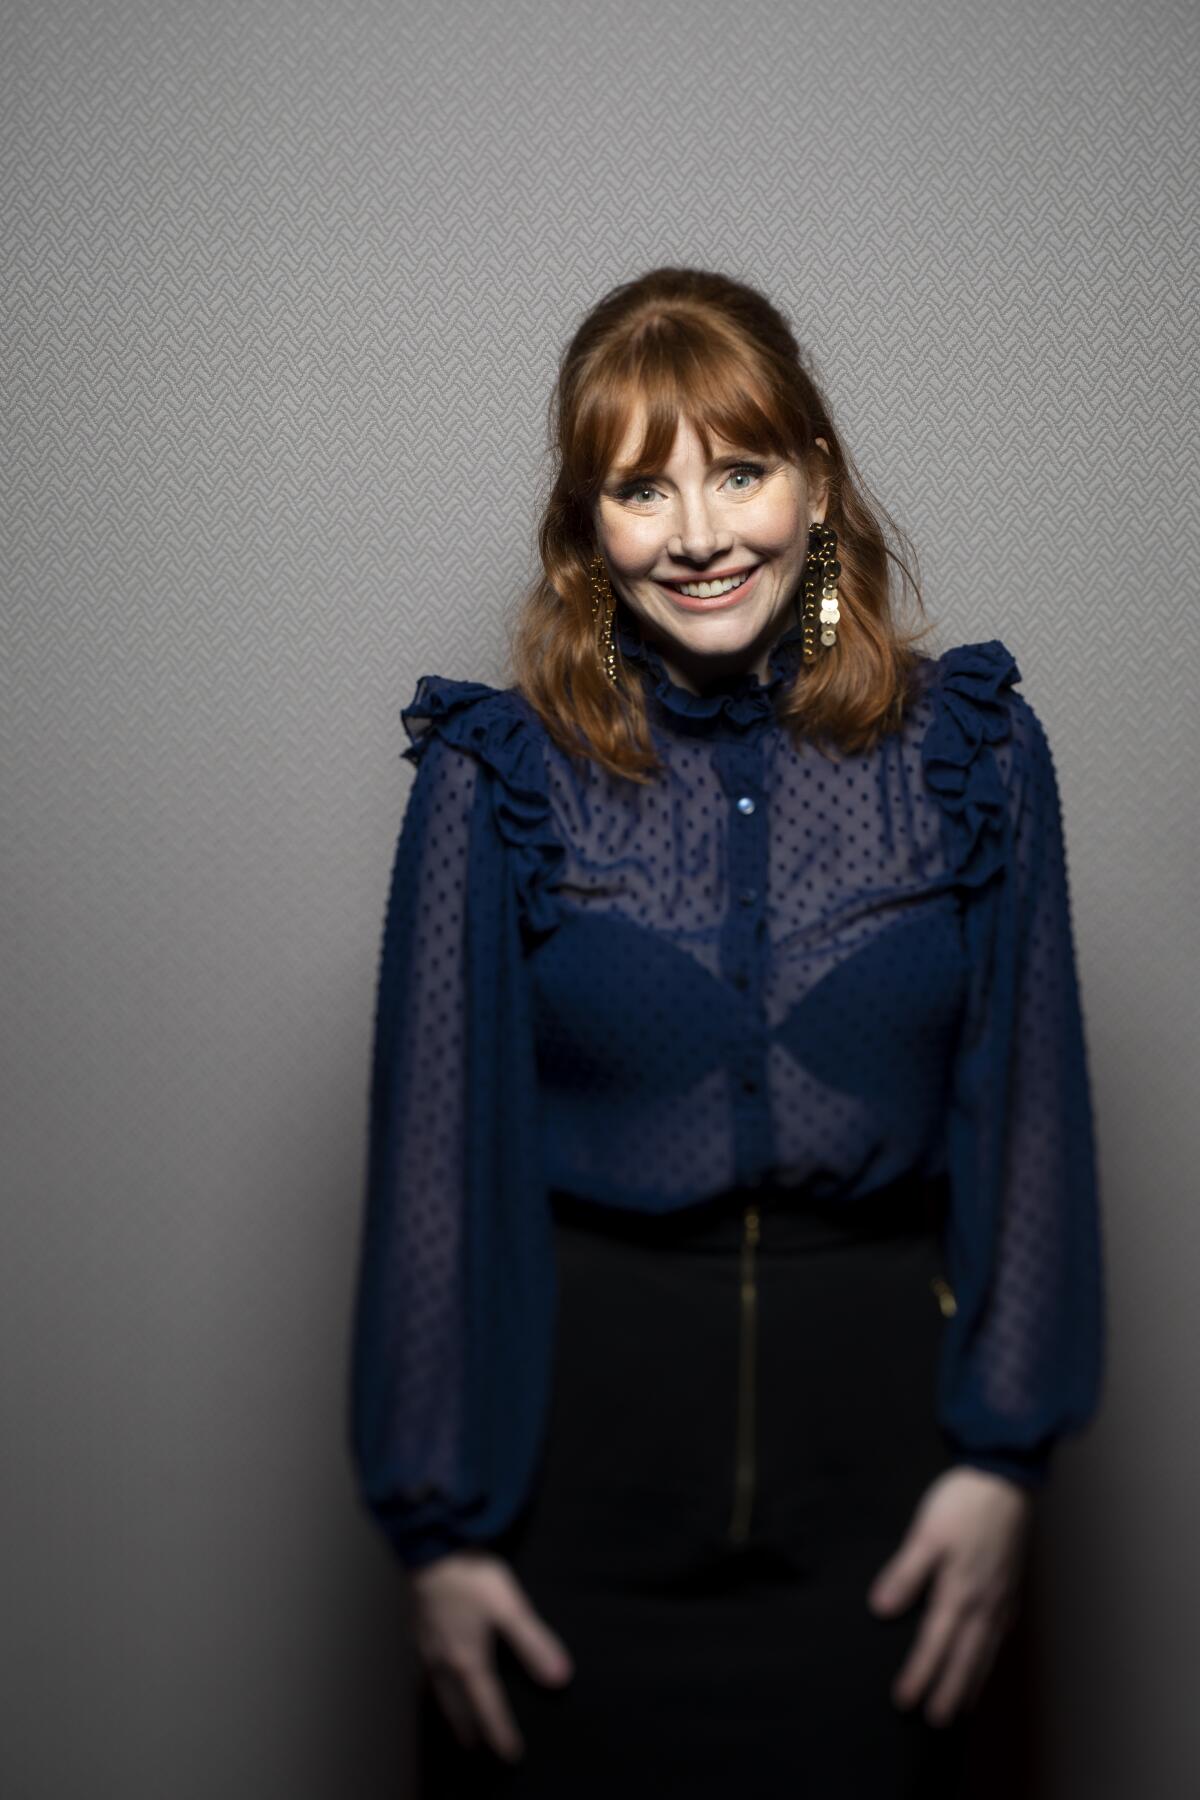 Bryce Dallas Howard, wearing a blue blouse, smiles as she promotes her documentary 'Dads'